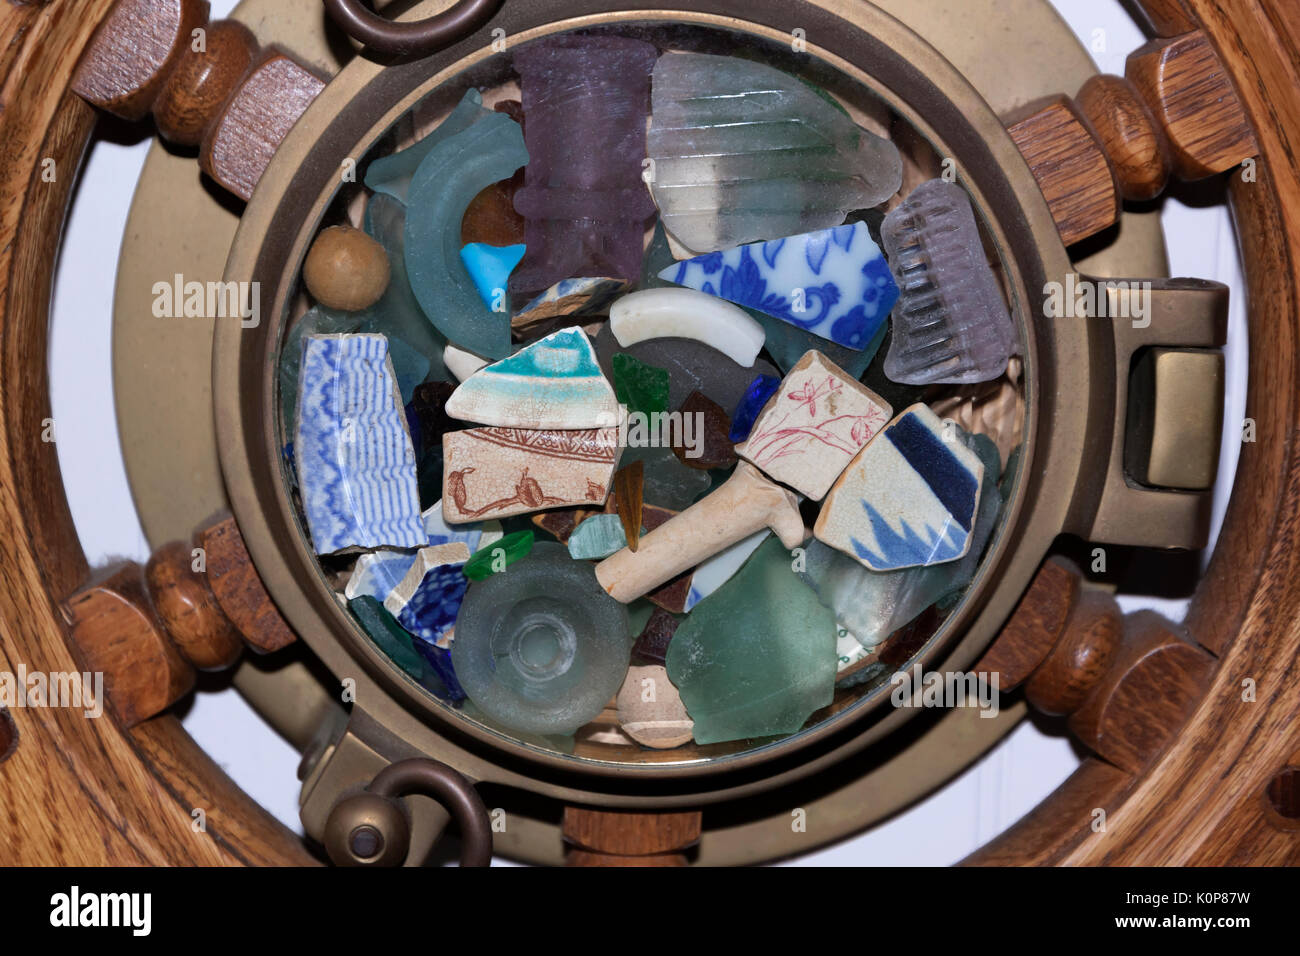 Sea glass, cracked pottery, & found objects displayed under glass in a ship wheel. Stock Photo